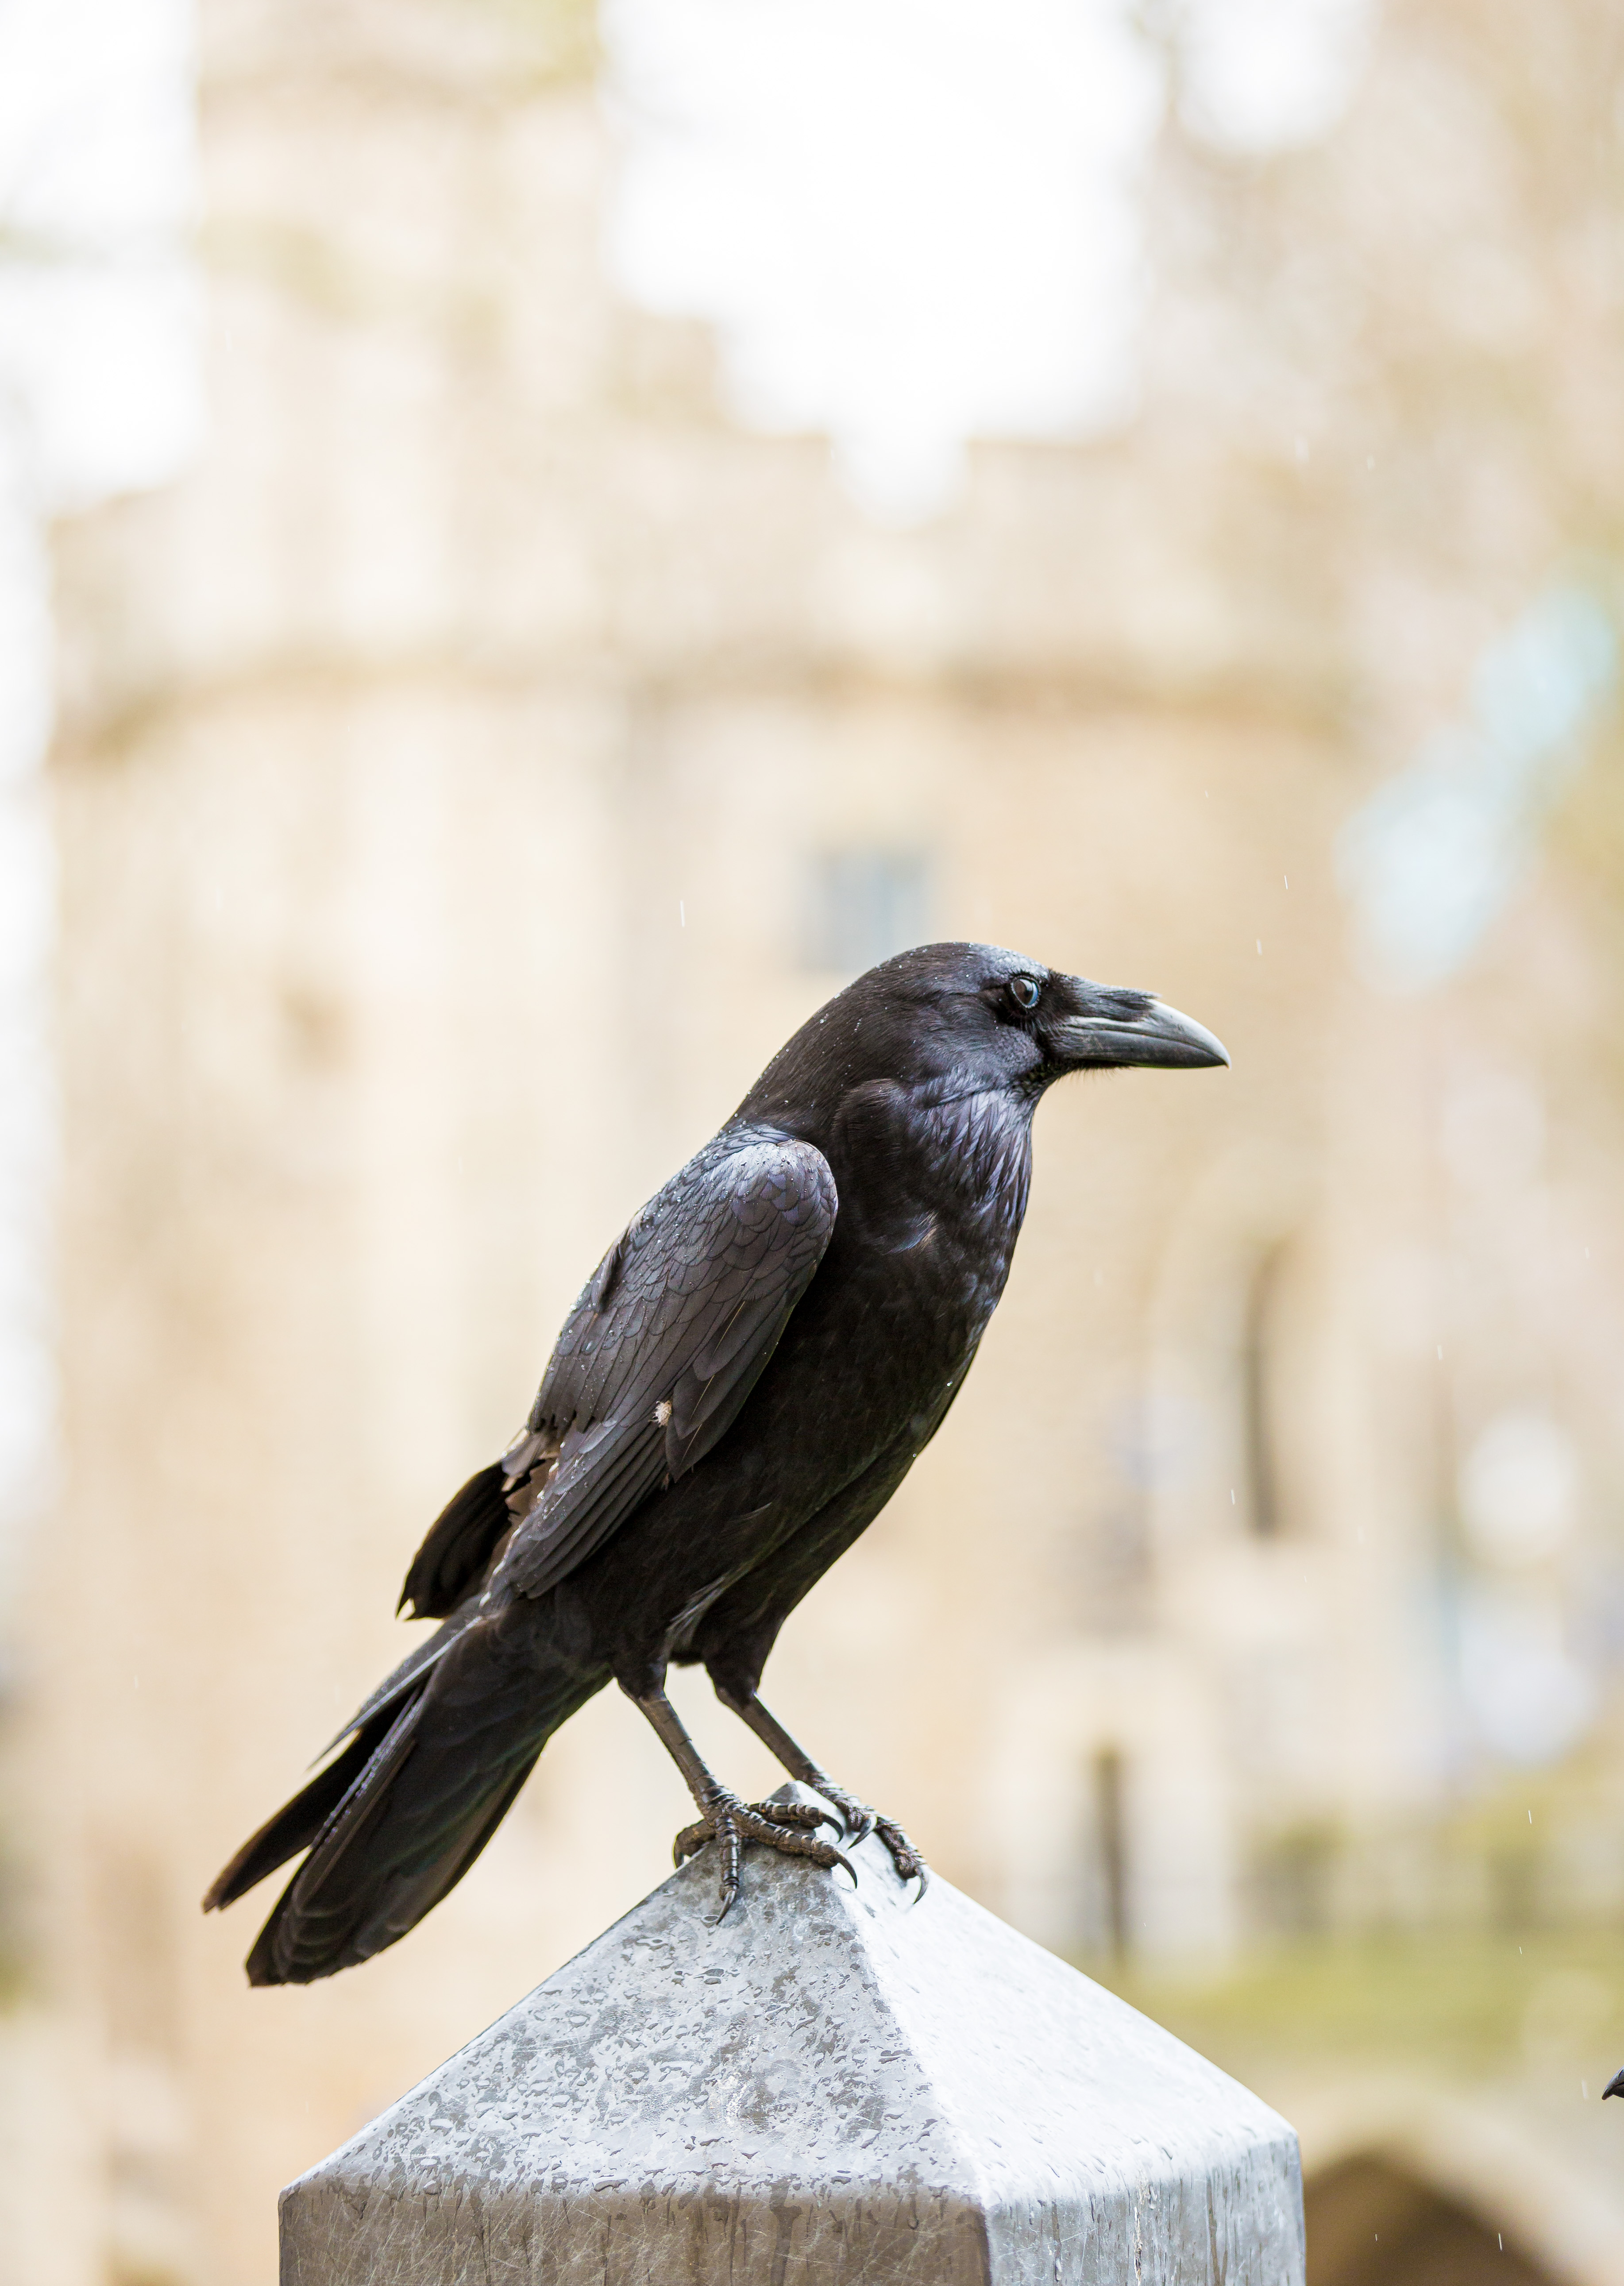 Black crow at the Tower of London